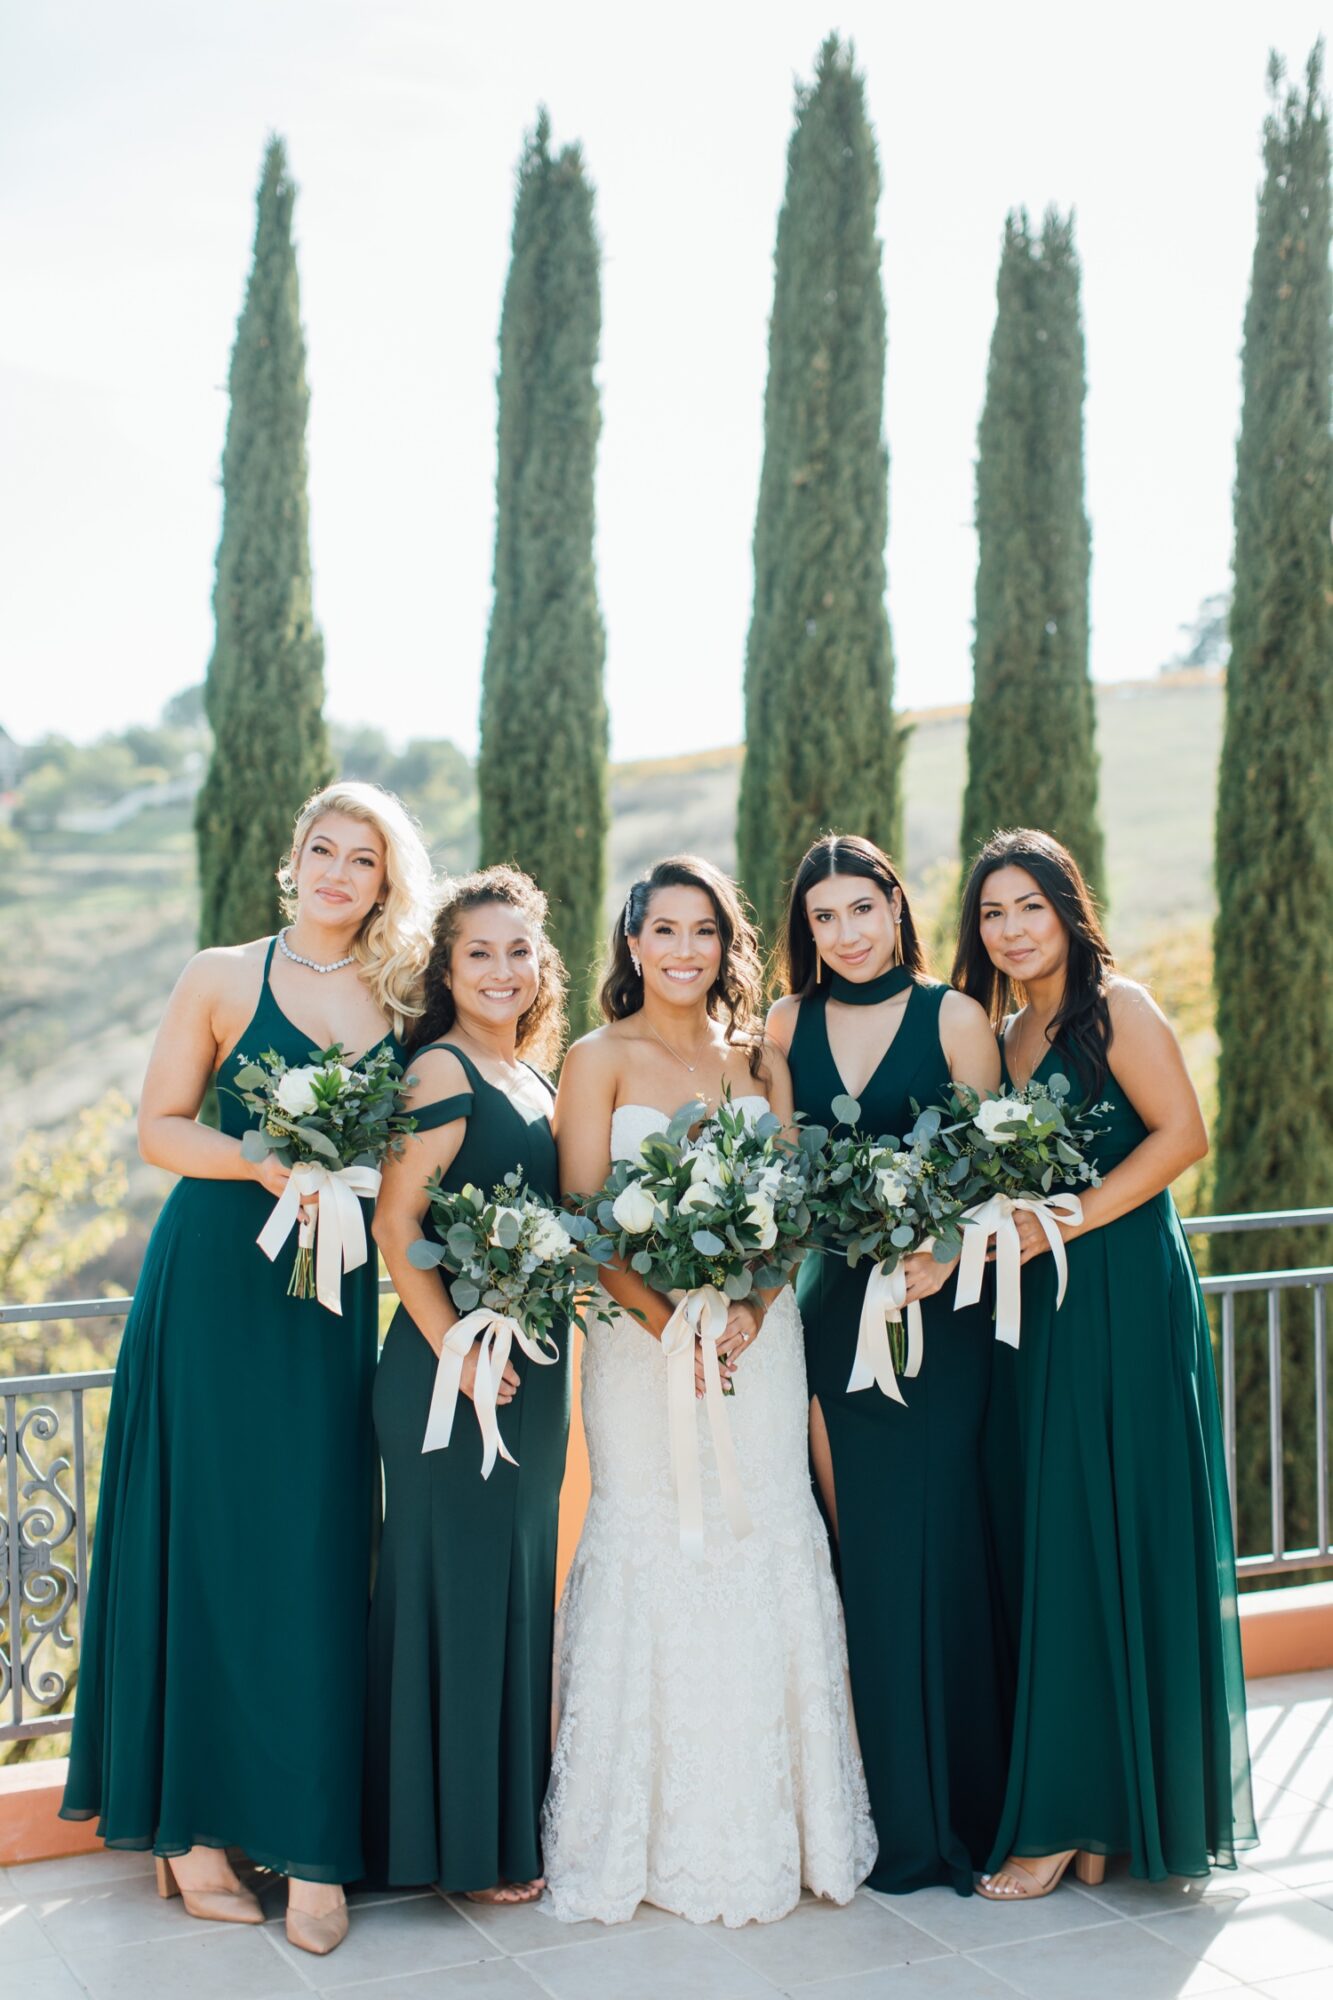 Bride smiling with her bridesmaids at Tuscany inspired wedding at Aterno Estate in Paso Robles California by wine country photographer Jessica Sofranko